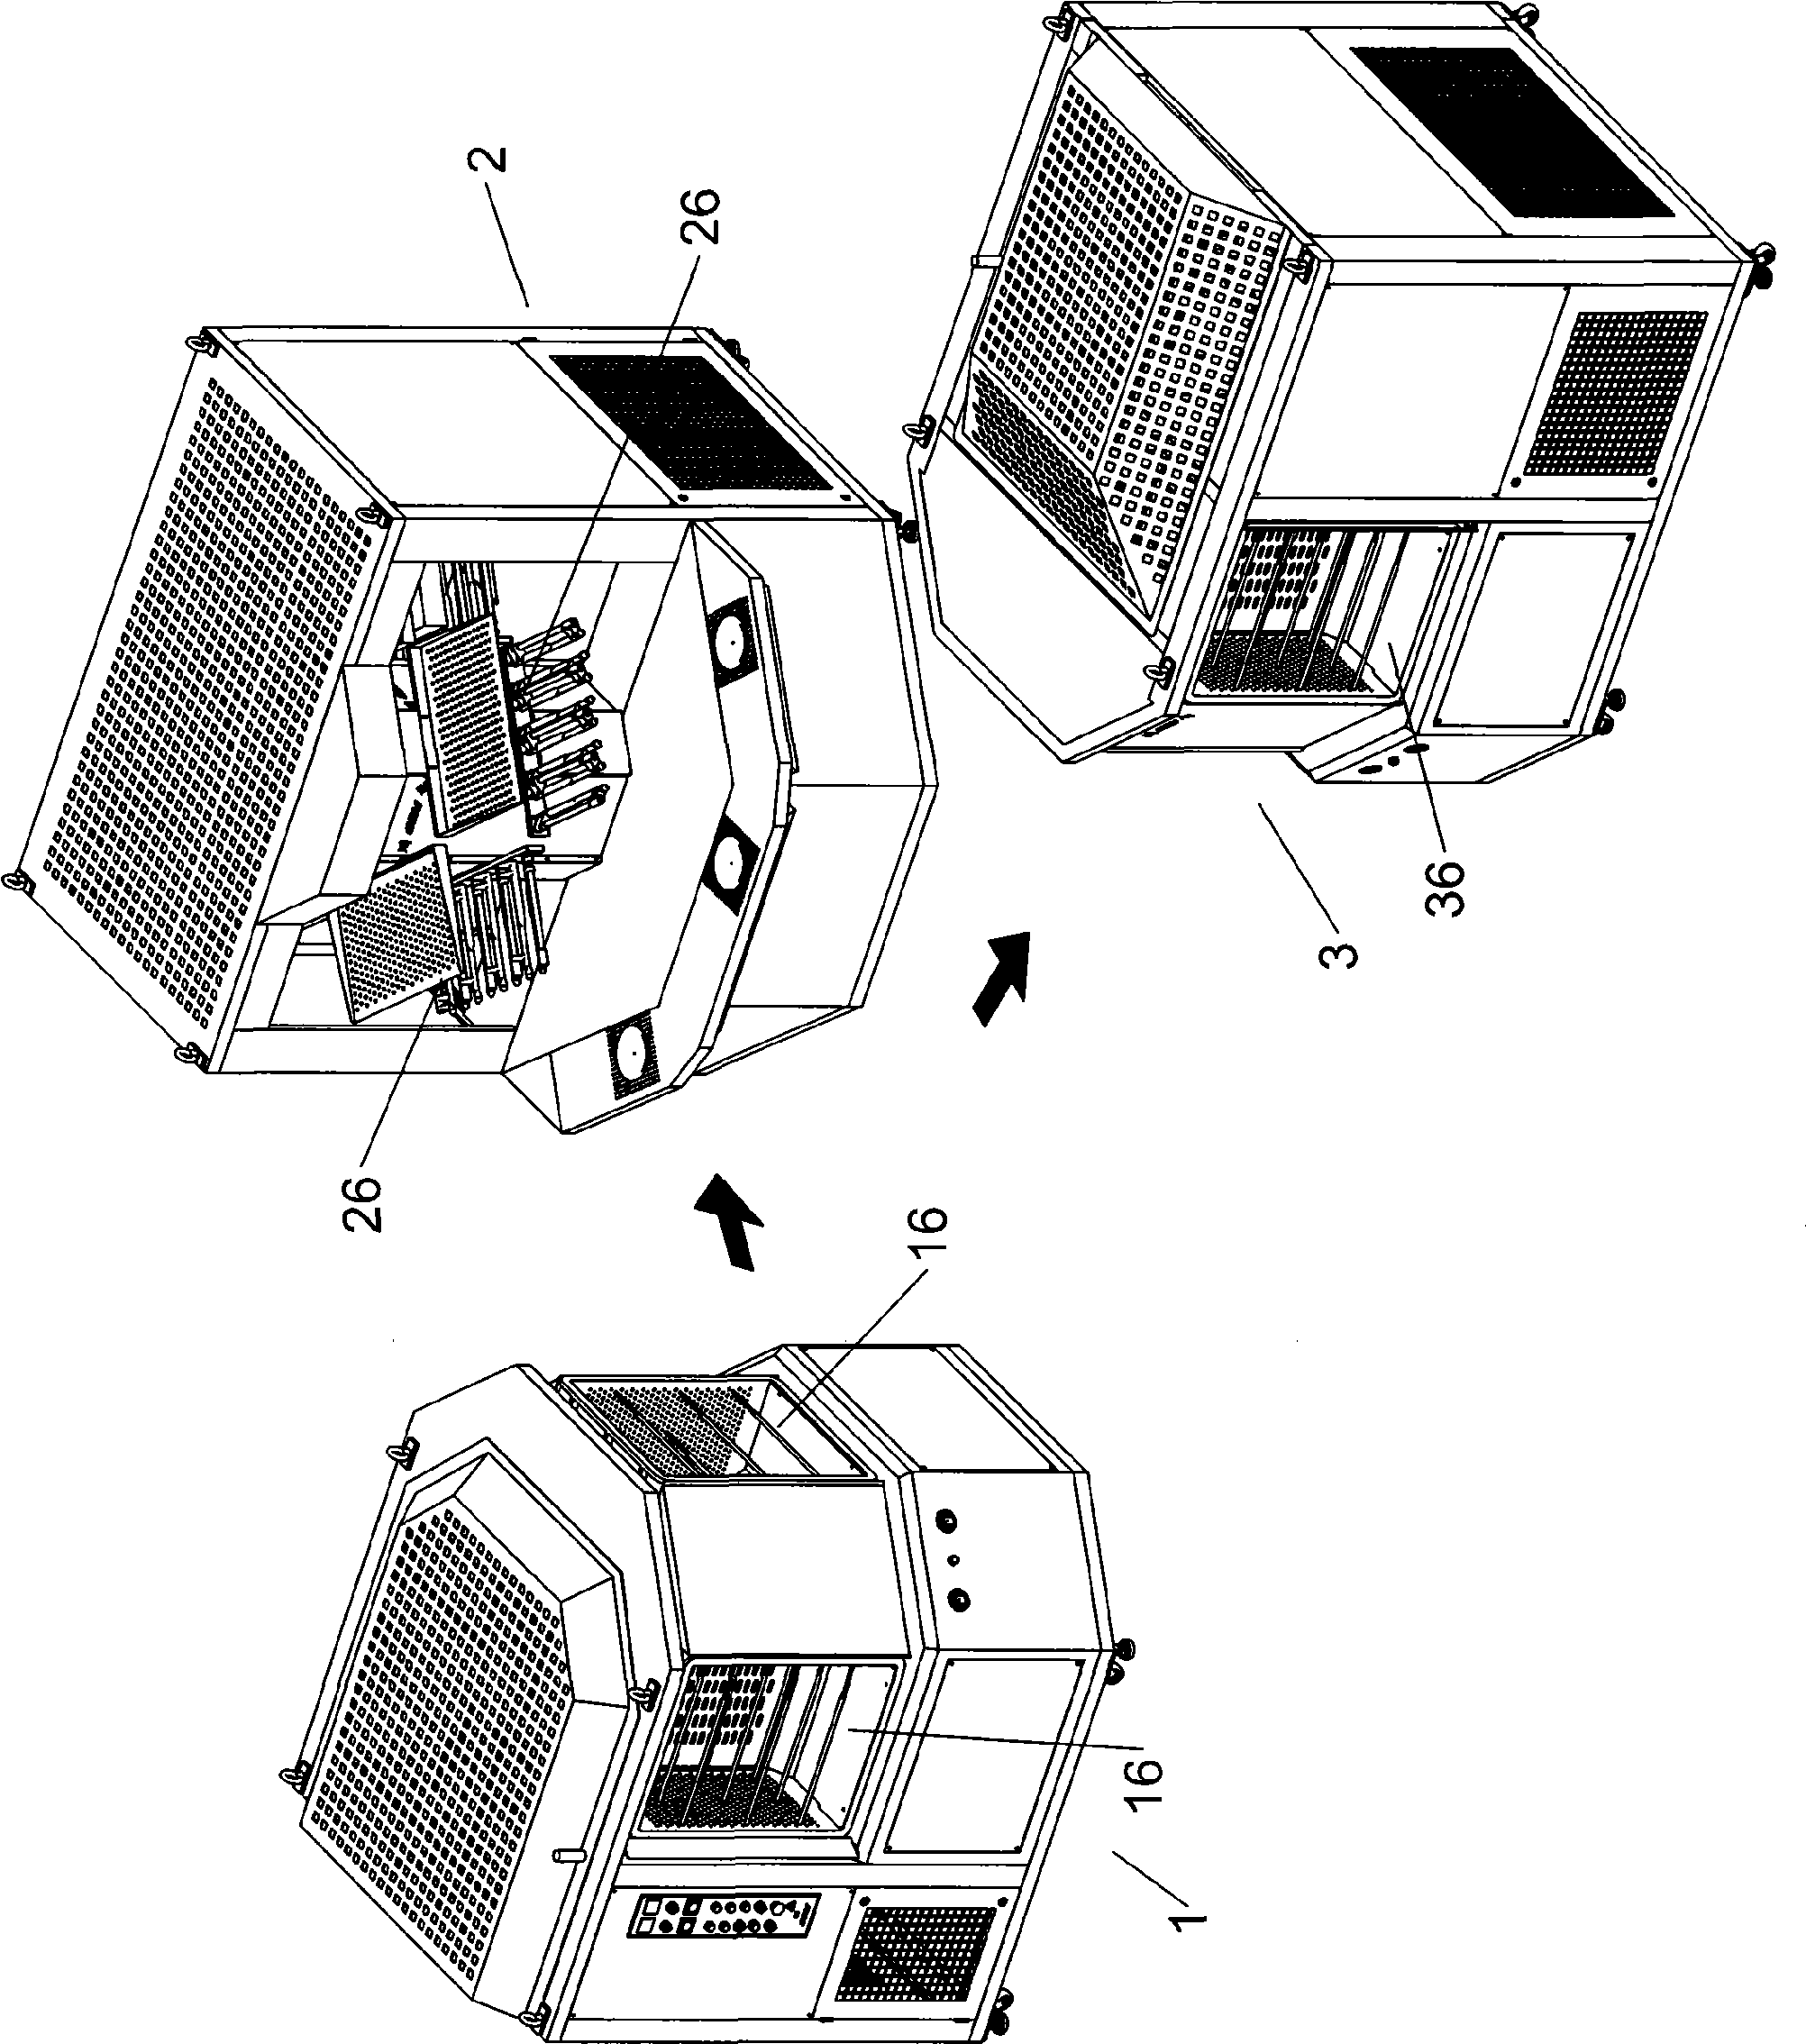 Improved vacuum-sulfurizing, bottom-sticking, freezing-moulding technique for processing boots and device thereof